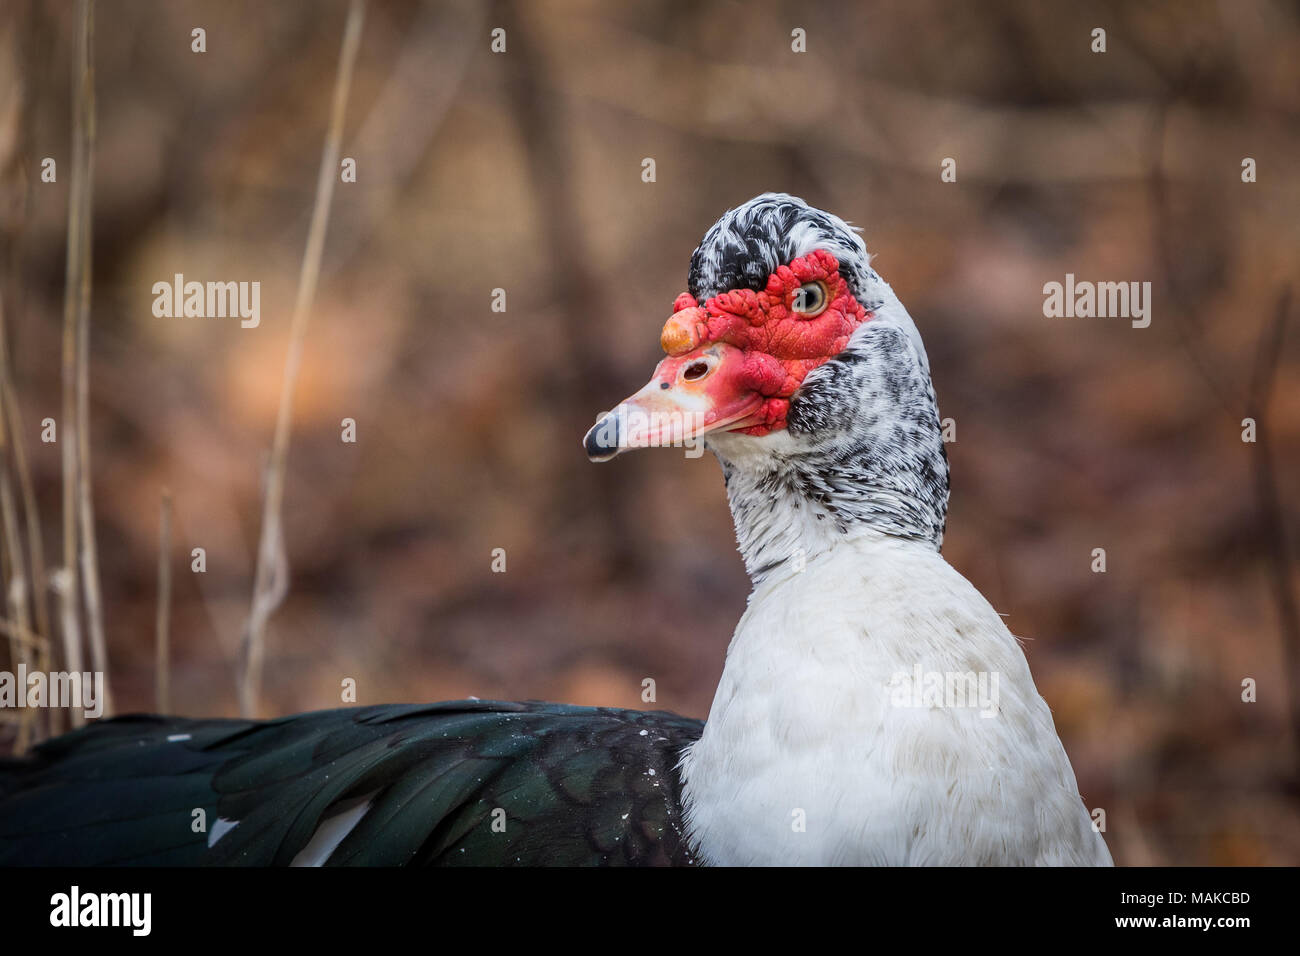 A Muscovy Duck rests on the ground, taking a break from a short flight. Stock Photo